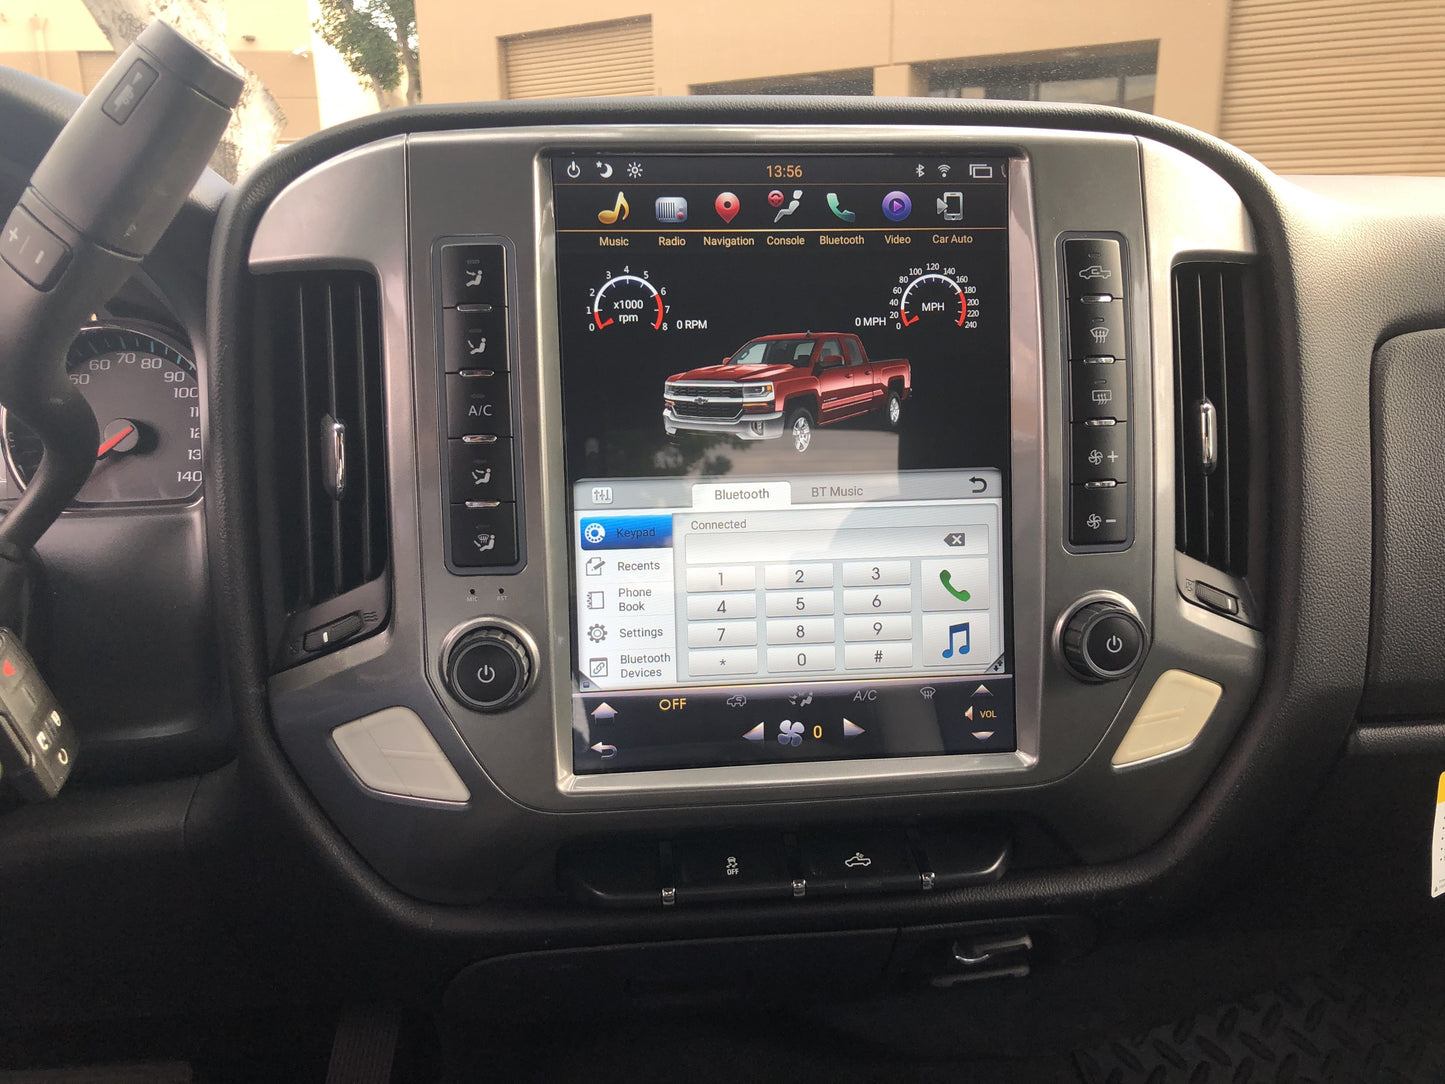 [ PX6 SIX-CORE ] [Special Edition] 12.1" Android 9 Fast boot Navi Radio for Chevy Silverado GMC SIERRA 2014 - 2019-Phoenix Automotive